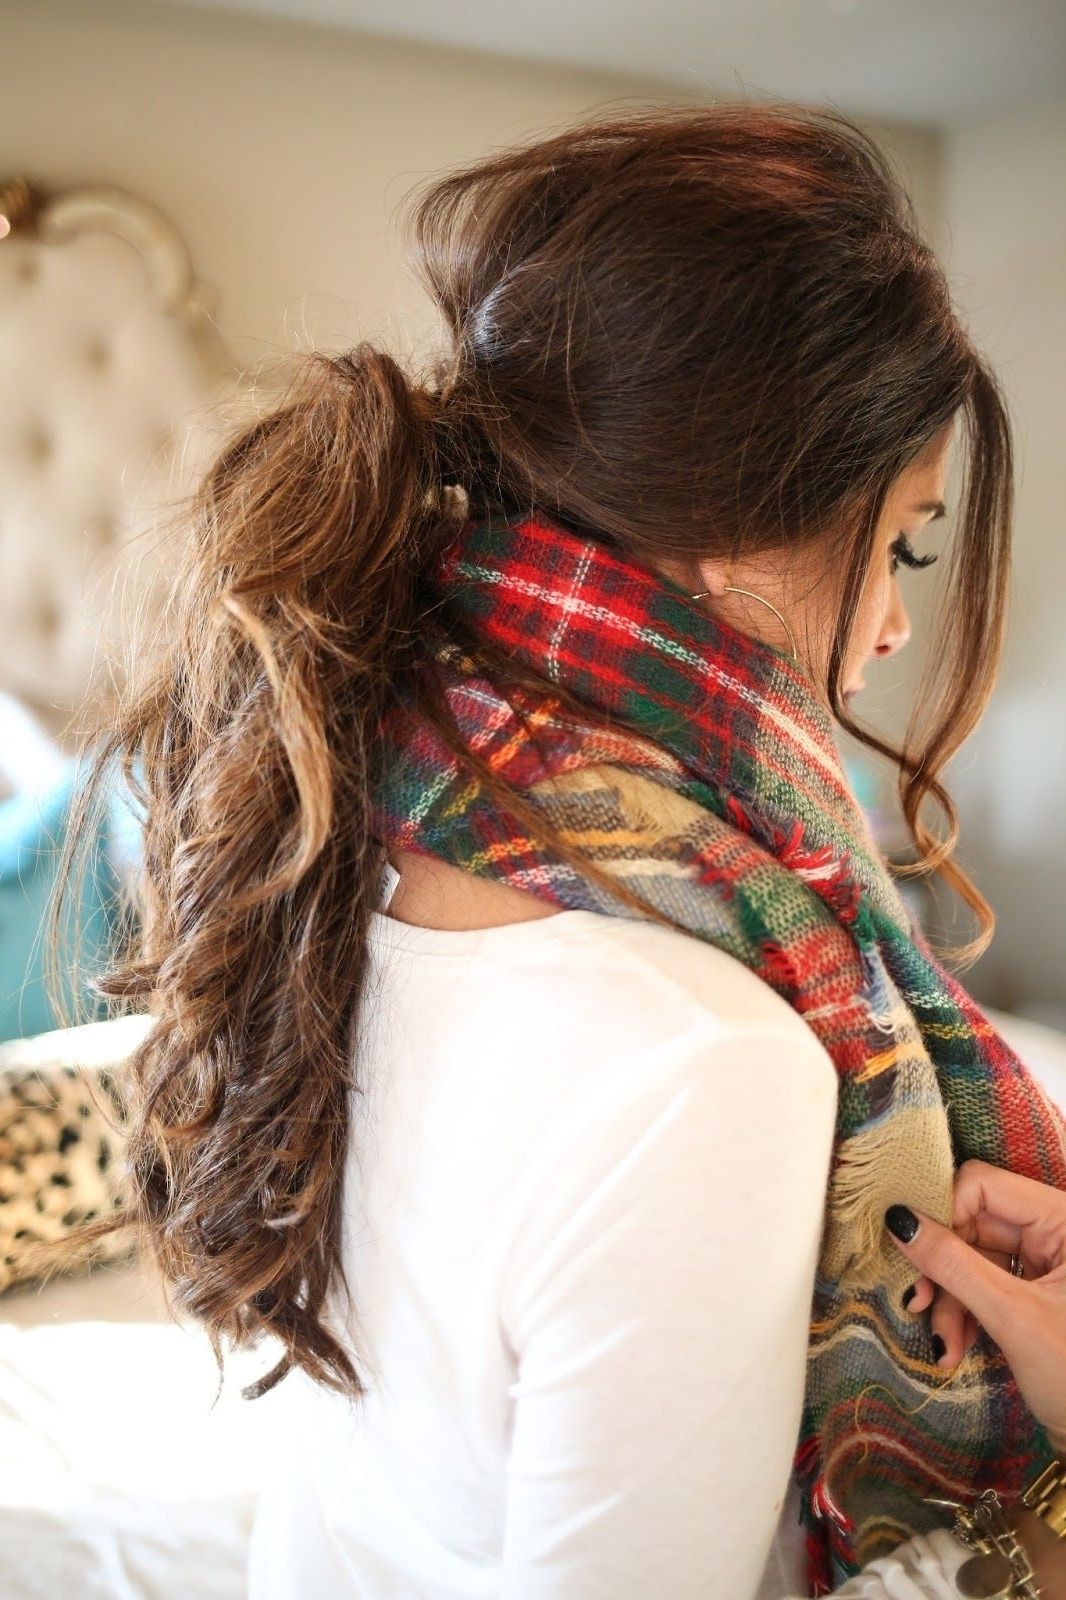 Top Off Your Look With These 5 Fall Hairstyles (View 5 of 20)